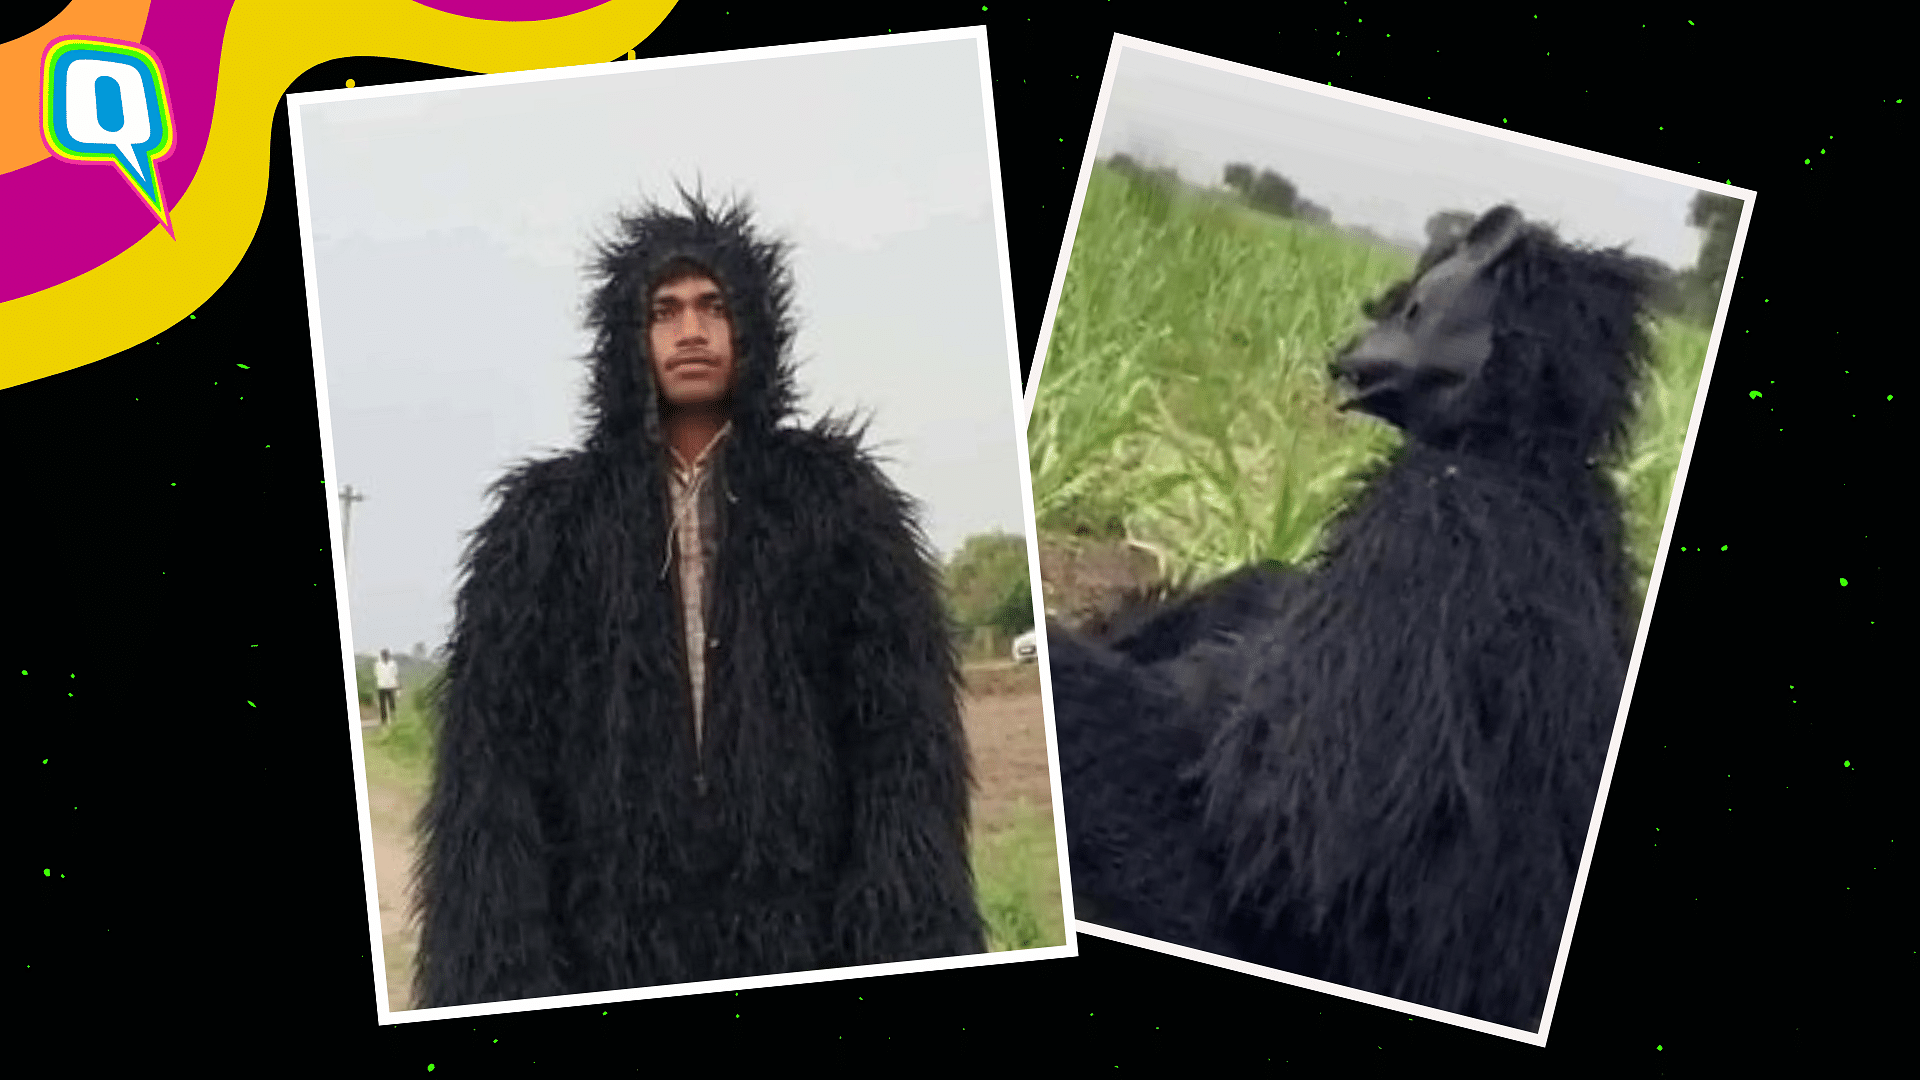 <div class="paragraphs"><p>UP Farmers Dress Up As Bears To Scare Off Monkeys Damaging Their Crops</p></div>